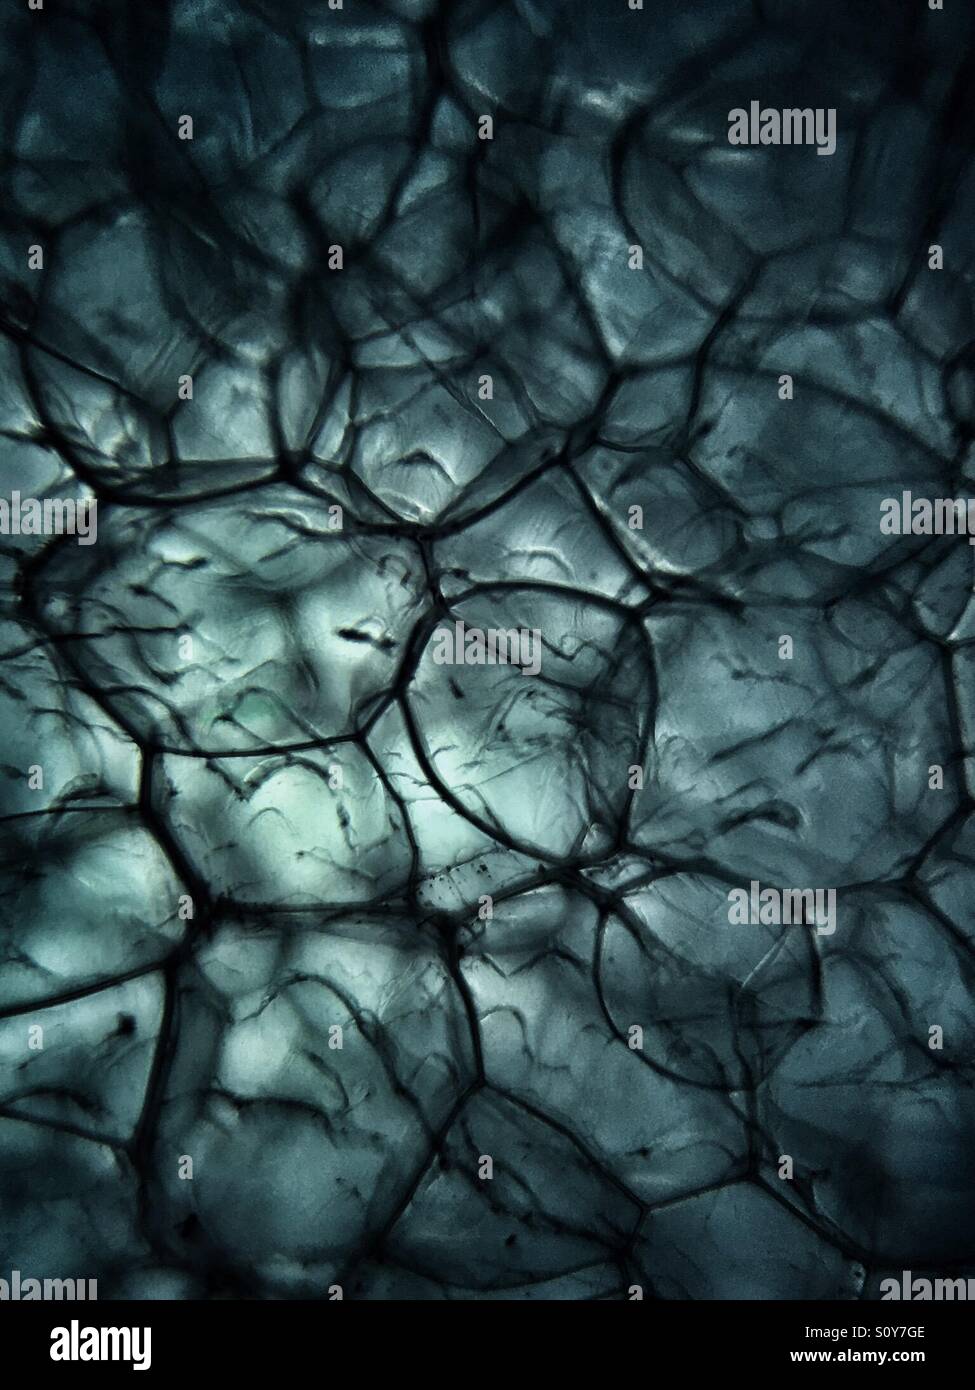 a light sheet of drywall texture for background macro Stock Photo - Alamy